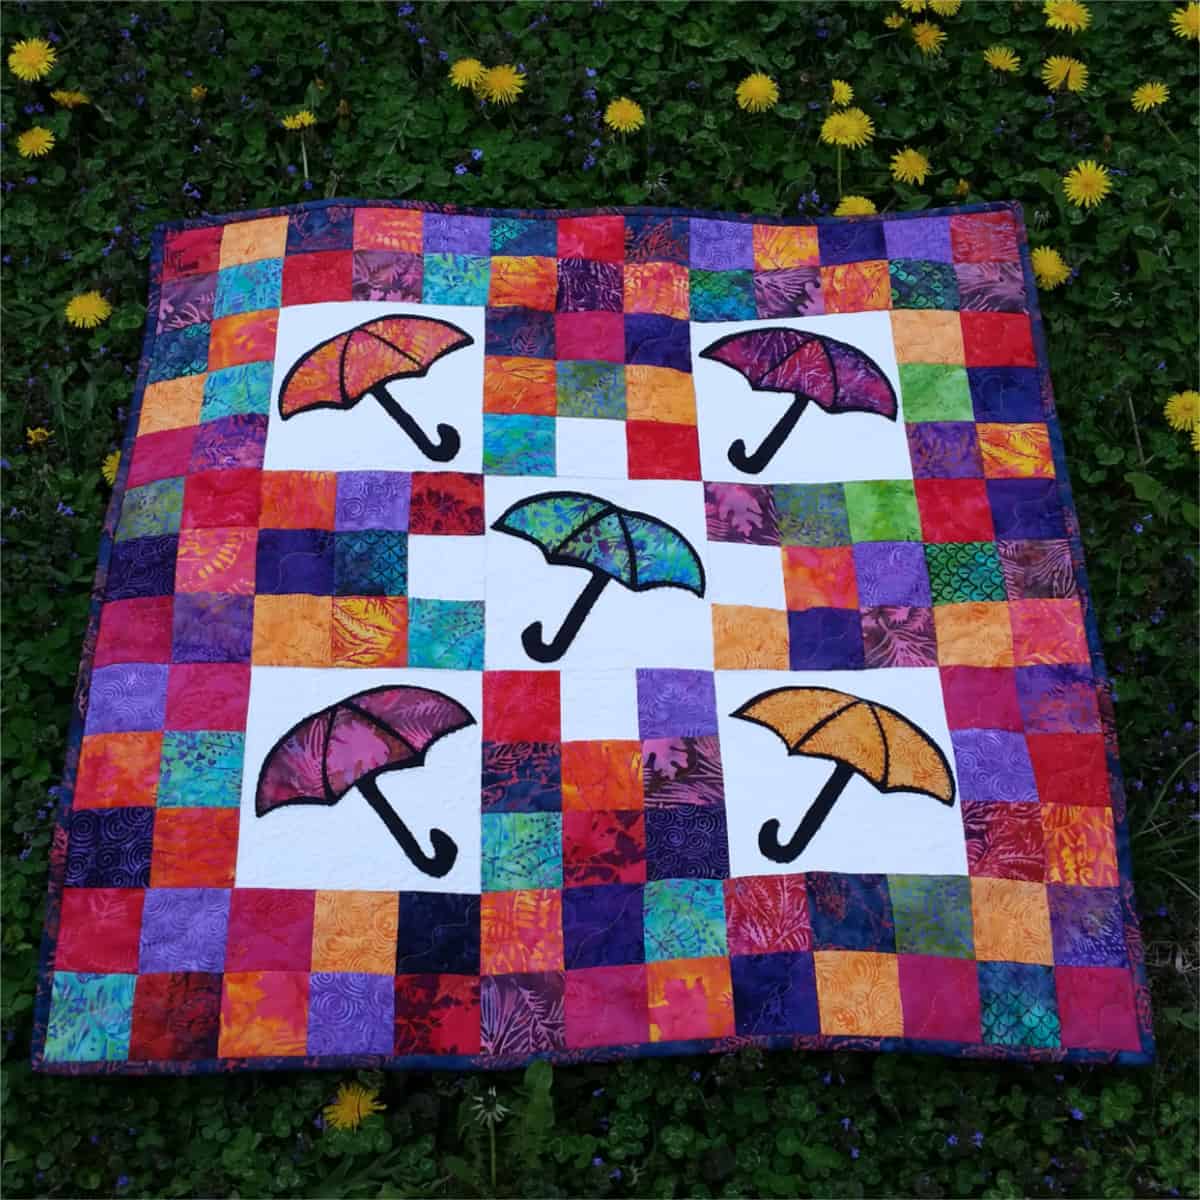 The quilt laying in the grass